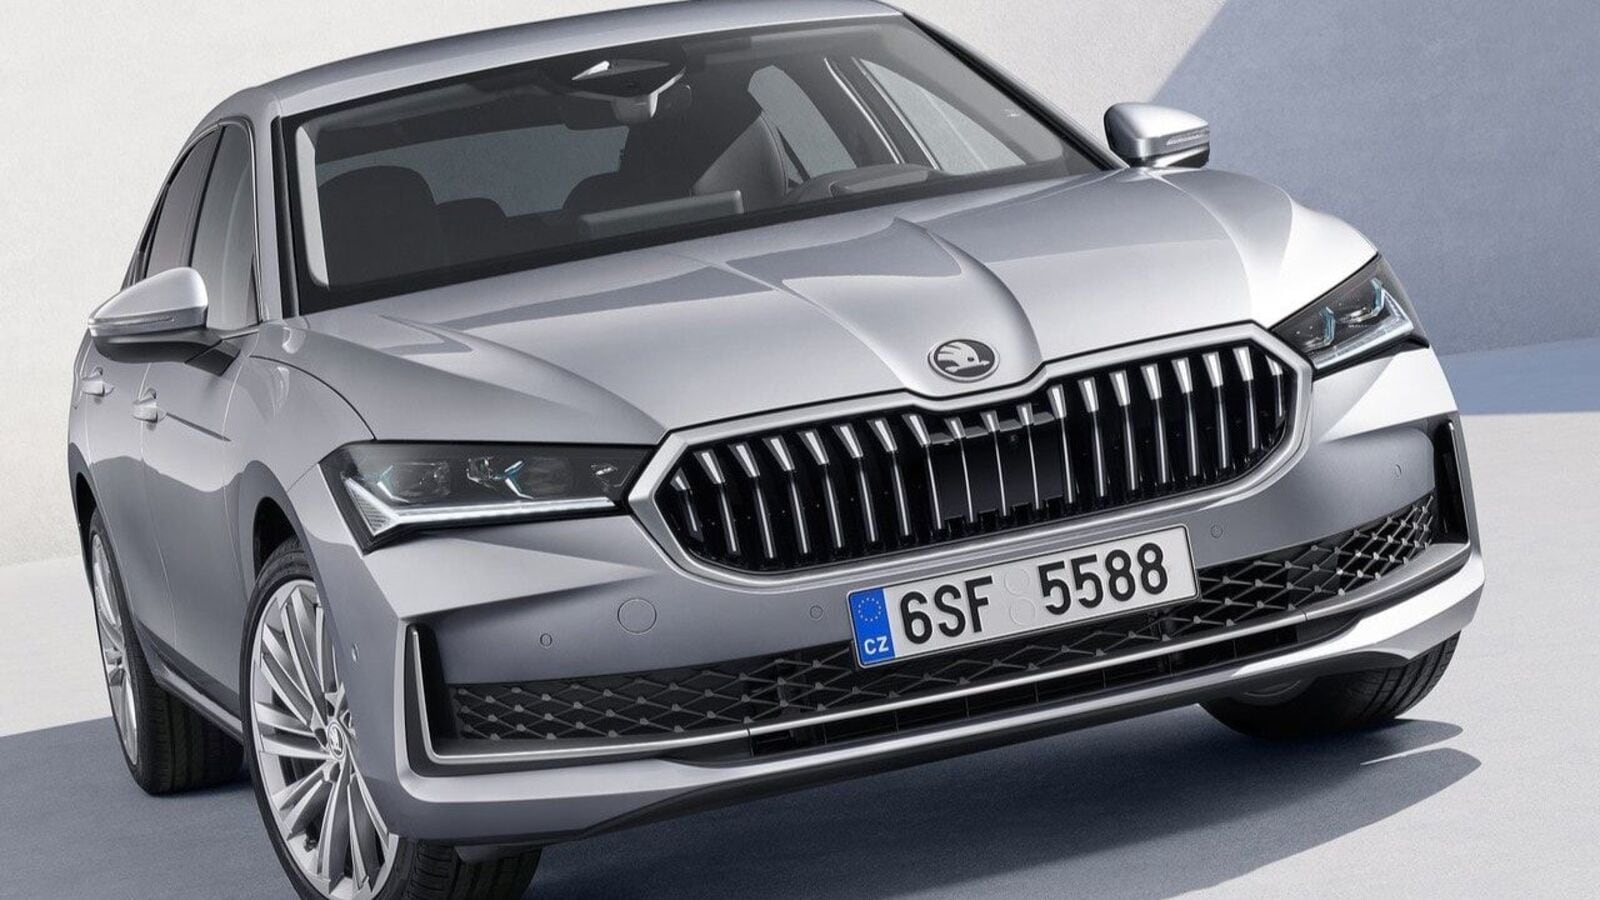 In pics: 2024 Skoda Superb looks more elegant and comes with